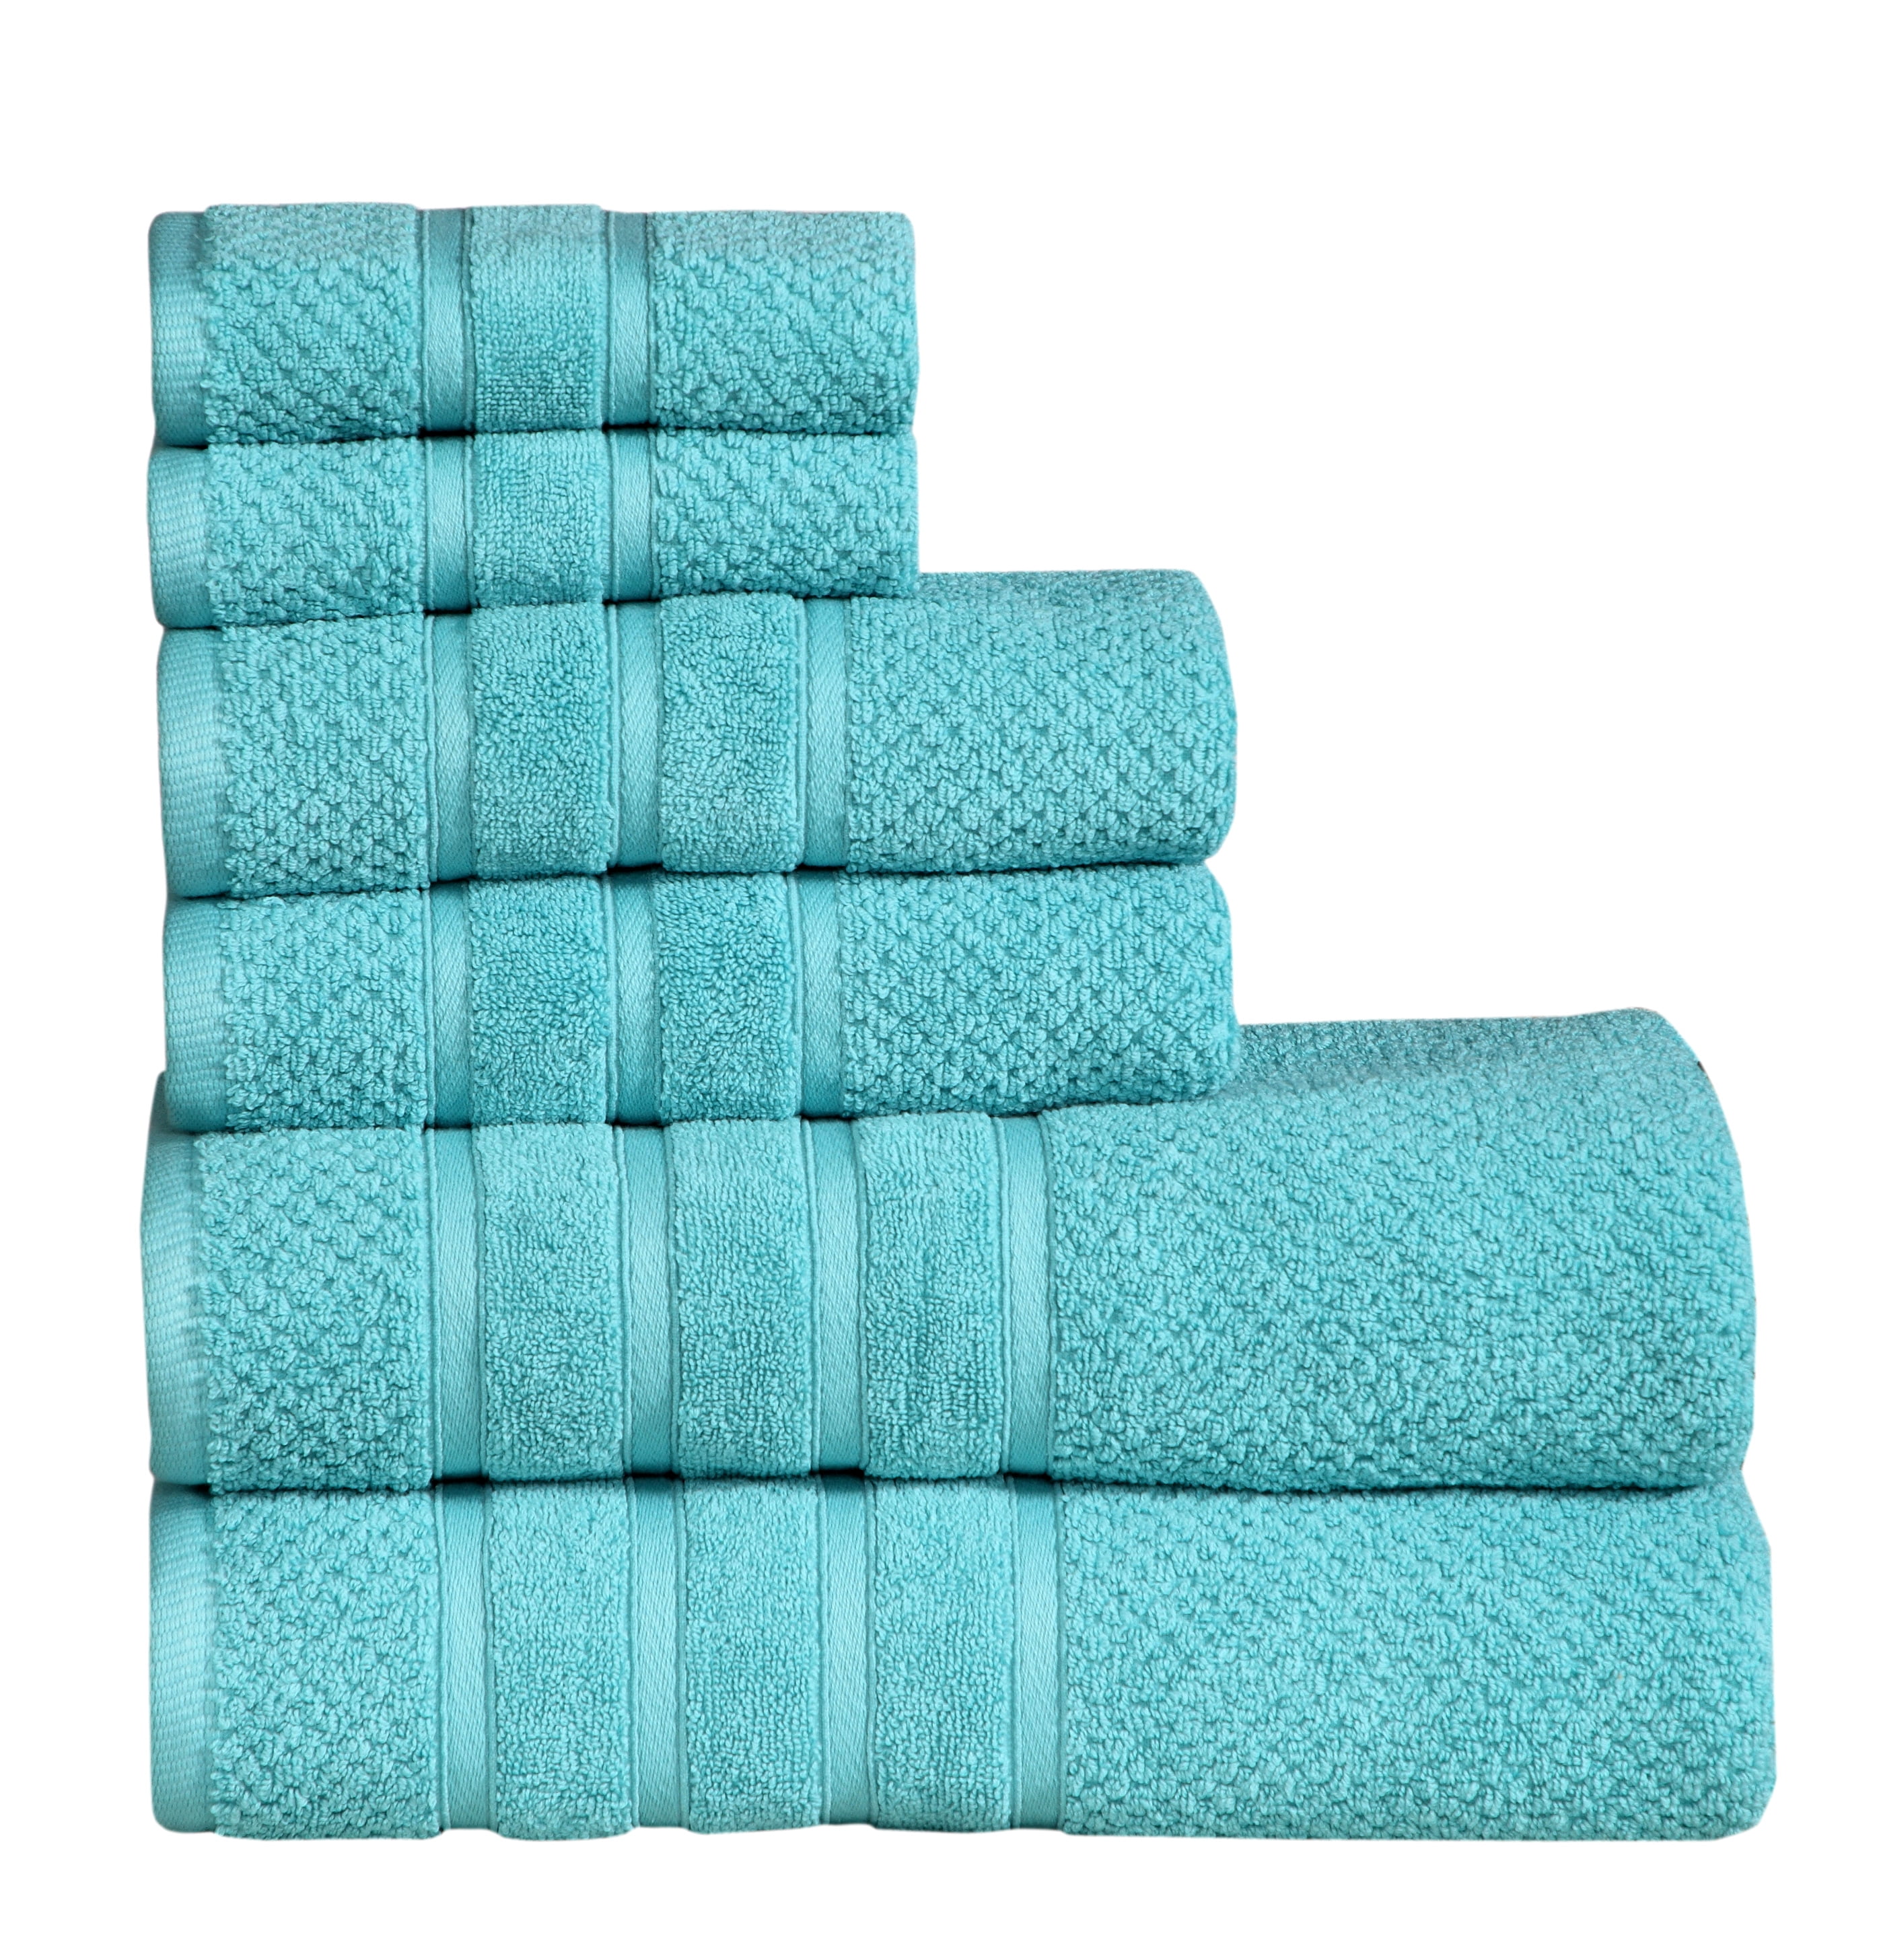 BrylaneHome 6 Piece 100% Cotton Terry Towel Set - 2 Bath Towels 2 Hand  Towels 2 Washcloths, Soft and Plush Highly Absorbent - Aqua Blue 